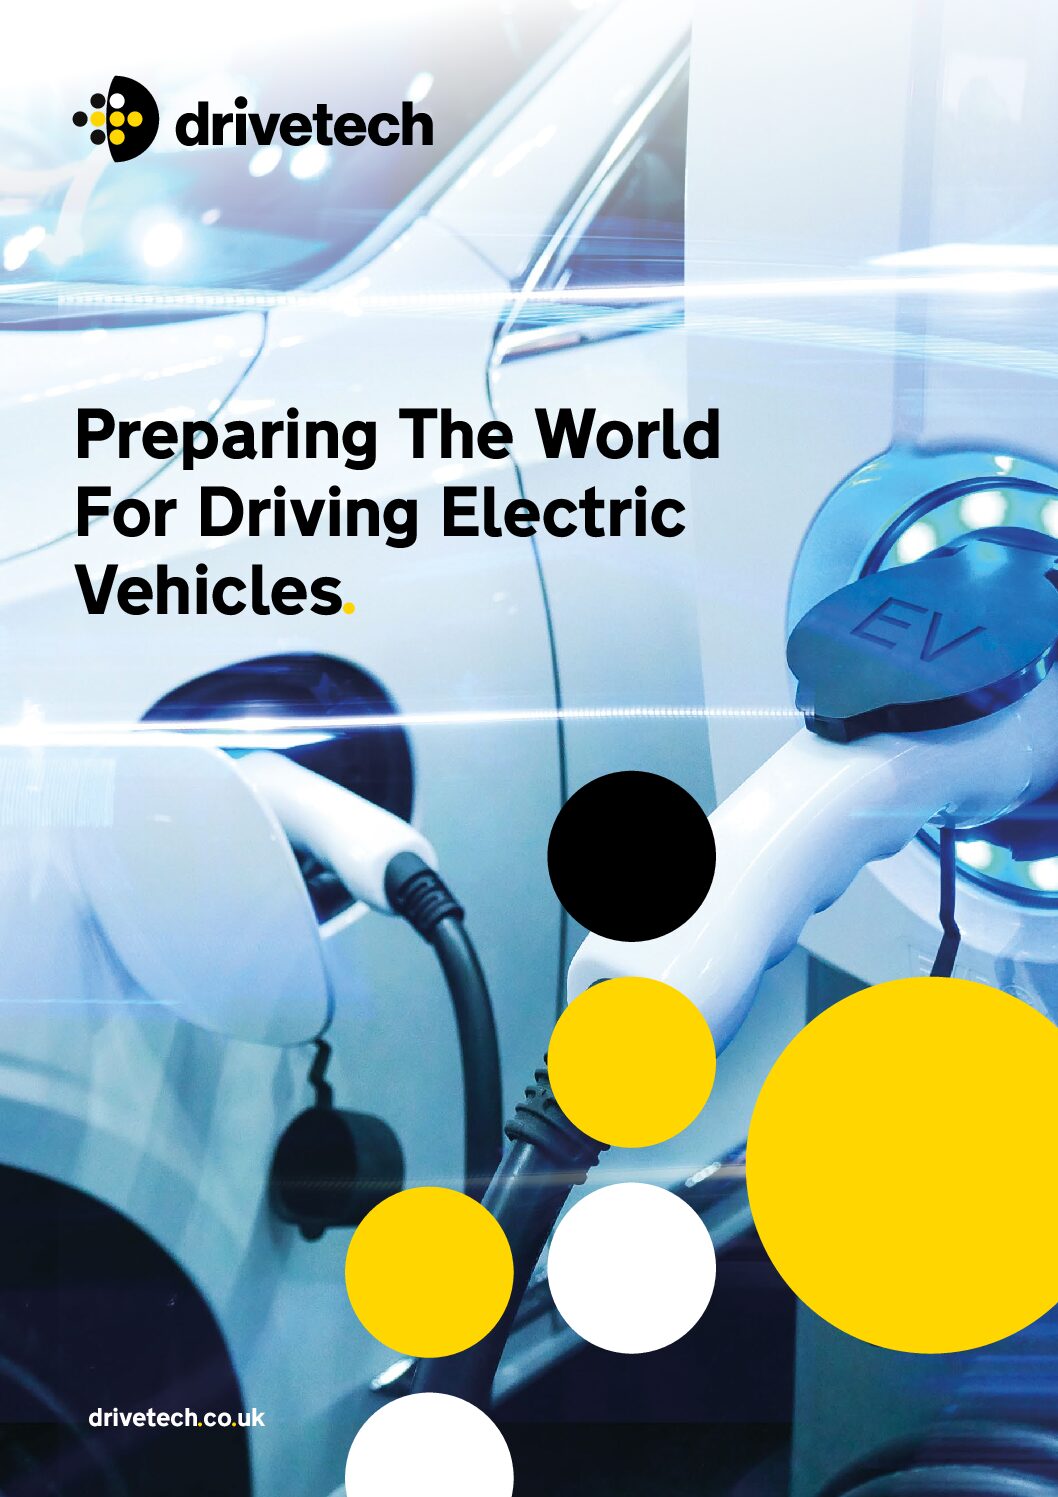 Brochure – Preparing The World For Electric Vehicles